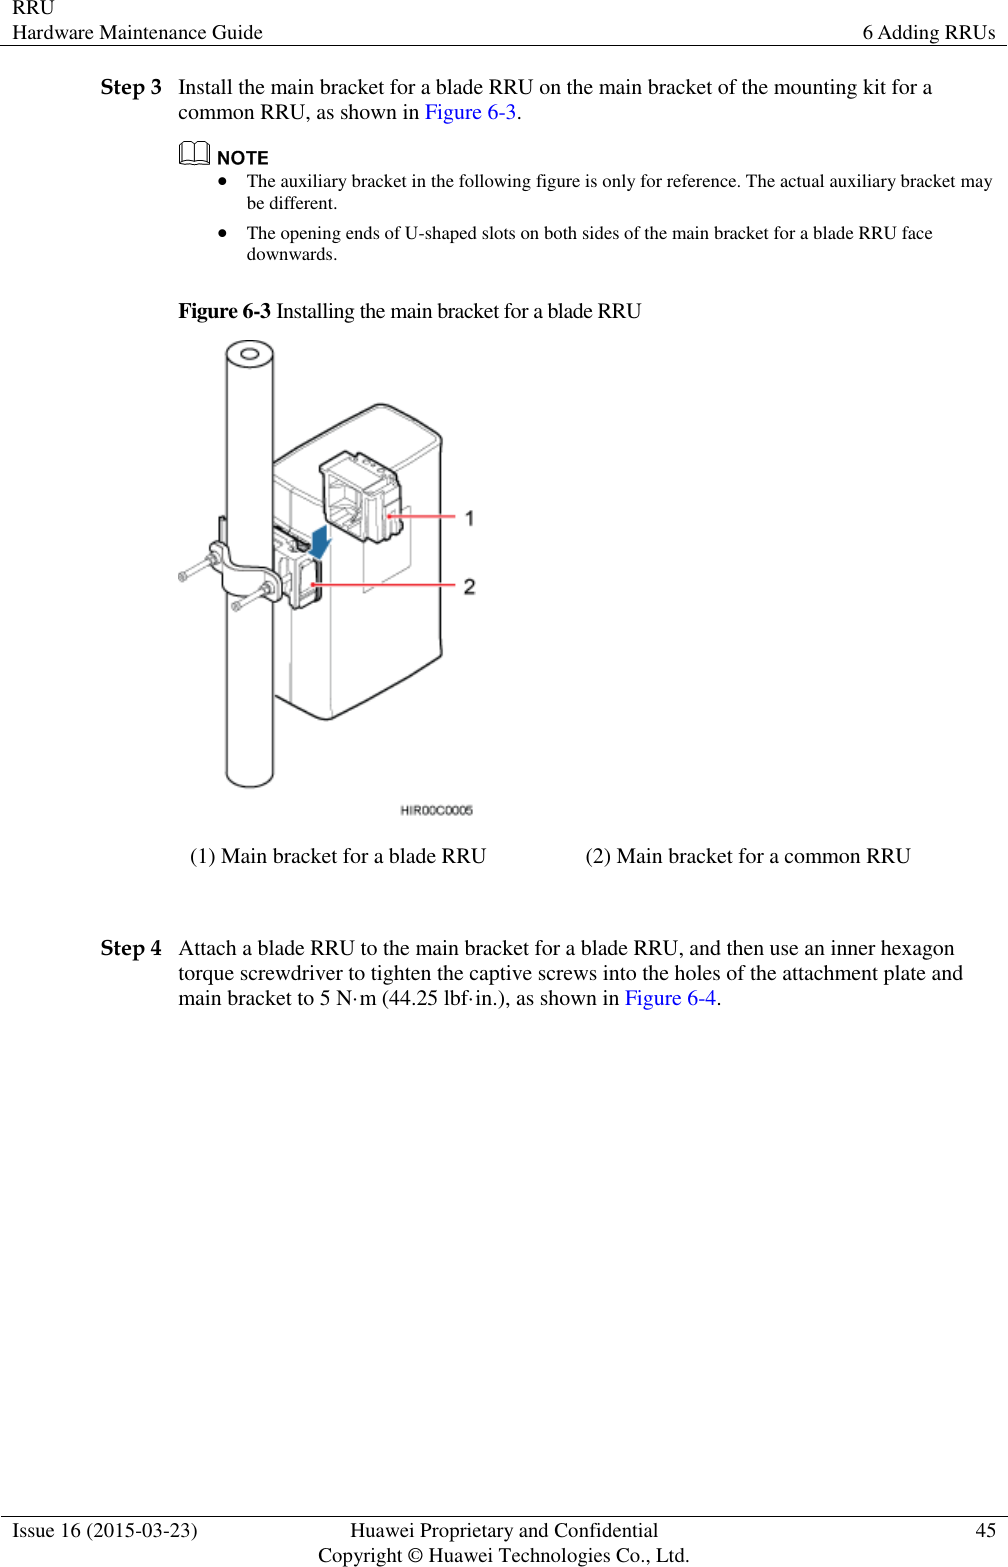 RRU Hardware Maintenance Guide 6 Adding RRUs  Issue 16 (2015-03-23) Huawei Proprietary and Confidential                                     Copyright © Huawei Technologies Co., Ltd. 45  Step 3 Install the main bracket for a blade RRU on the main bracket of the mounting kit for a common RRU, as shown in Figure 6-3.   The auxiliary bracket in the following figure is only for reference. The actual auxiliary bracket may be different.  The opening ends of U-shaped slots on both sides of the main bracket for a blade RRU face downwards. Figure 6-3 Installing the main bracket for a blade RRU  (1) Main bracket for a blade RRU (2) Main bracket for a common RRU  Step 4 Attach a blade RRU to the main bracket for a blade RRU, and then use an inner hexagon torque screwdriver to tighten the captive screws into the holes of the attachment plate and main bracket to 5 N·m (44.25 lbf·in.), as shown in Figure 6-4. 